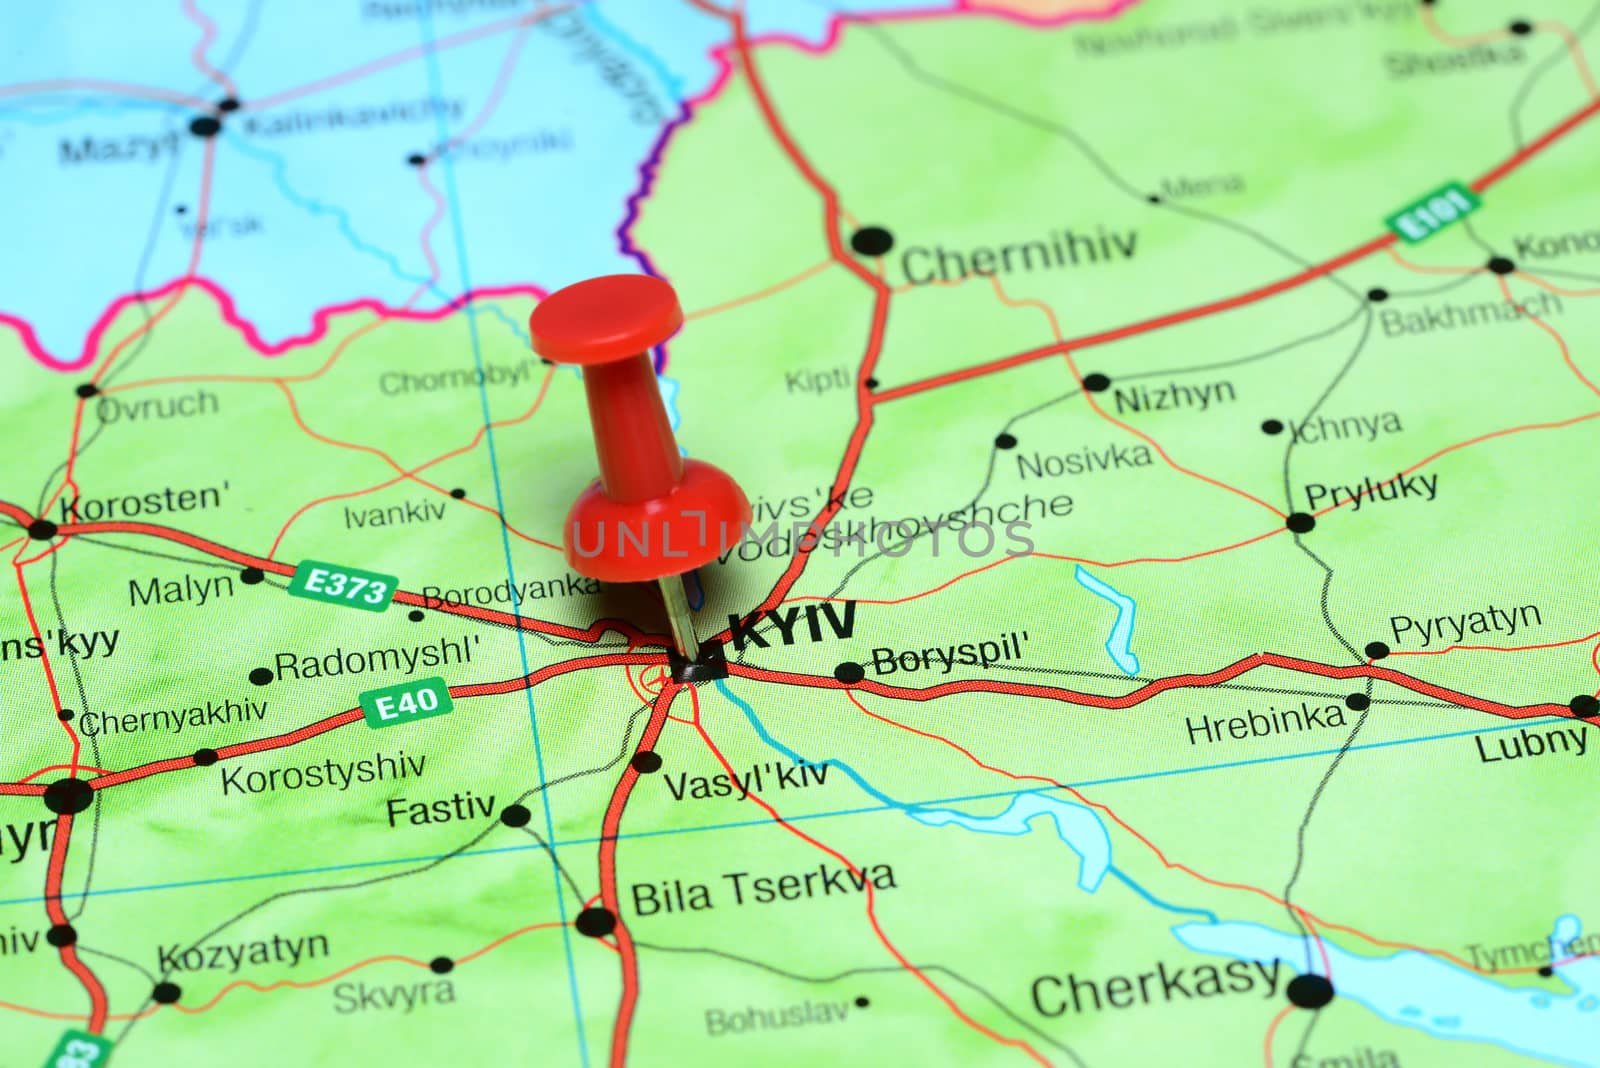 Photo of pinned Kyiv on a map of europe. May be used as illustration for traveling theme.